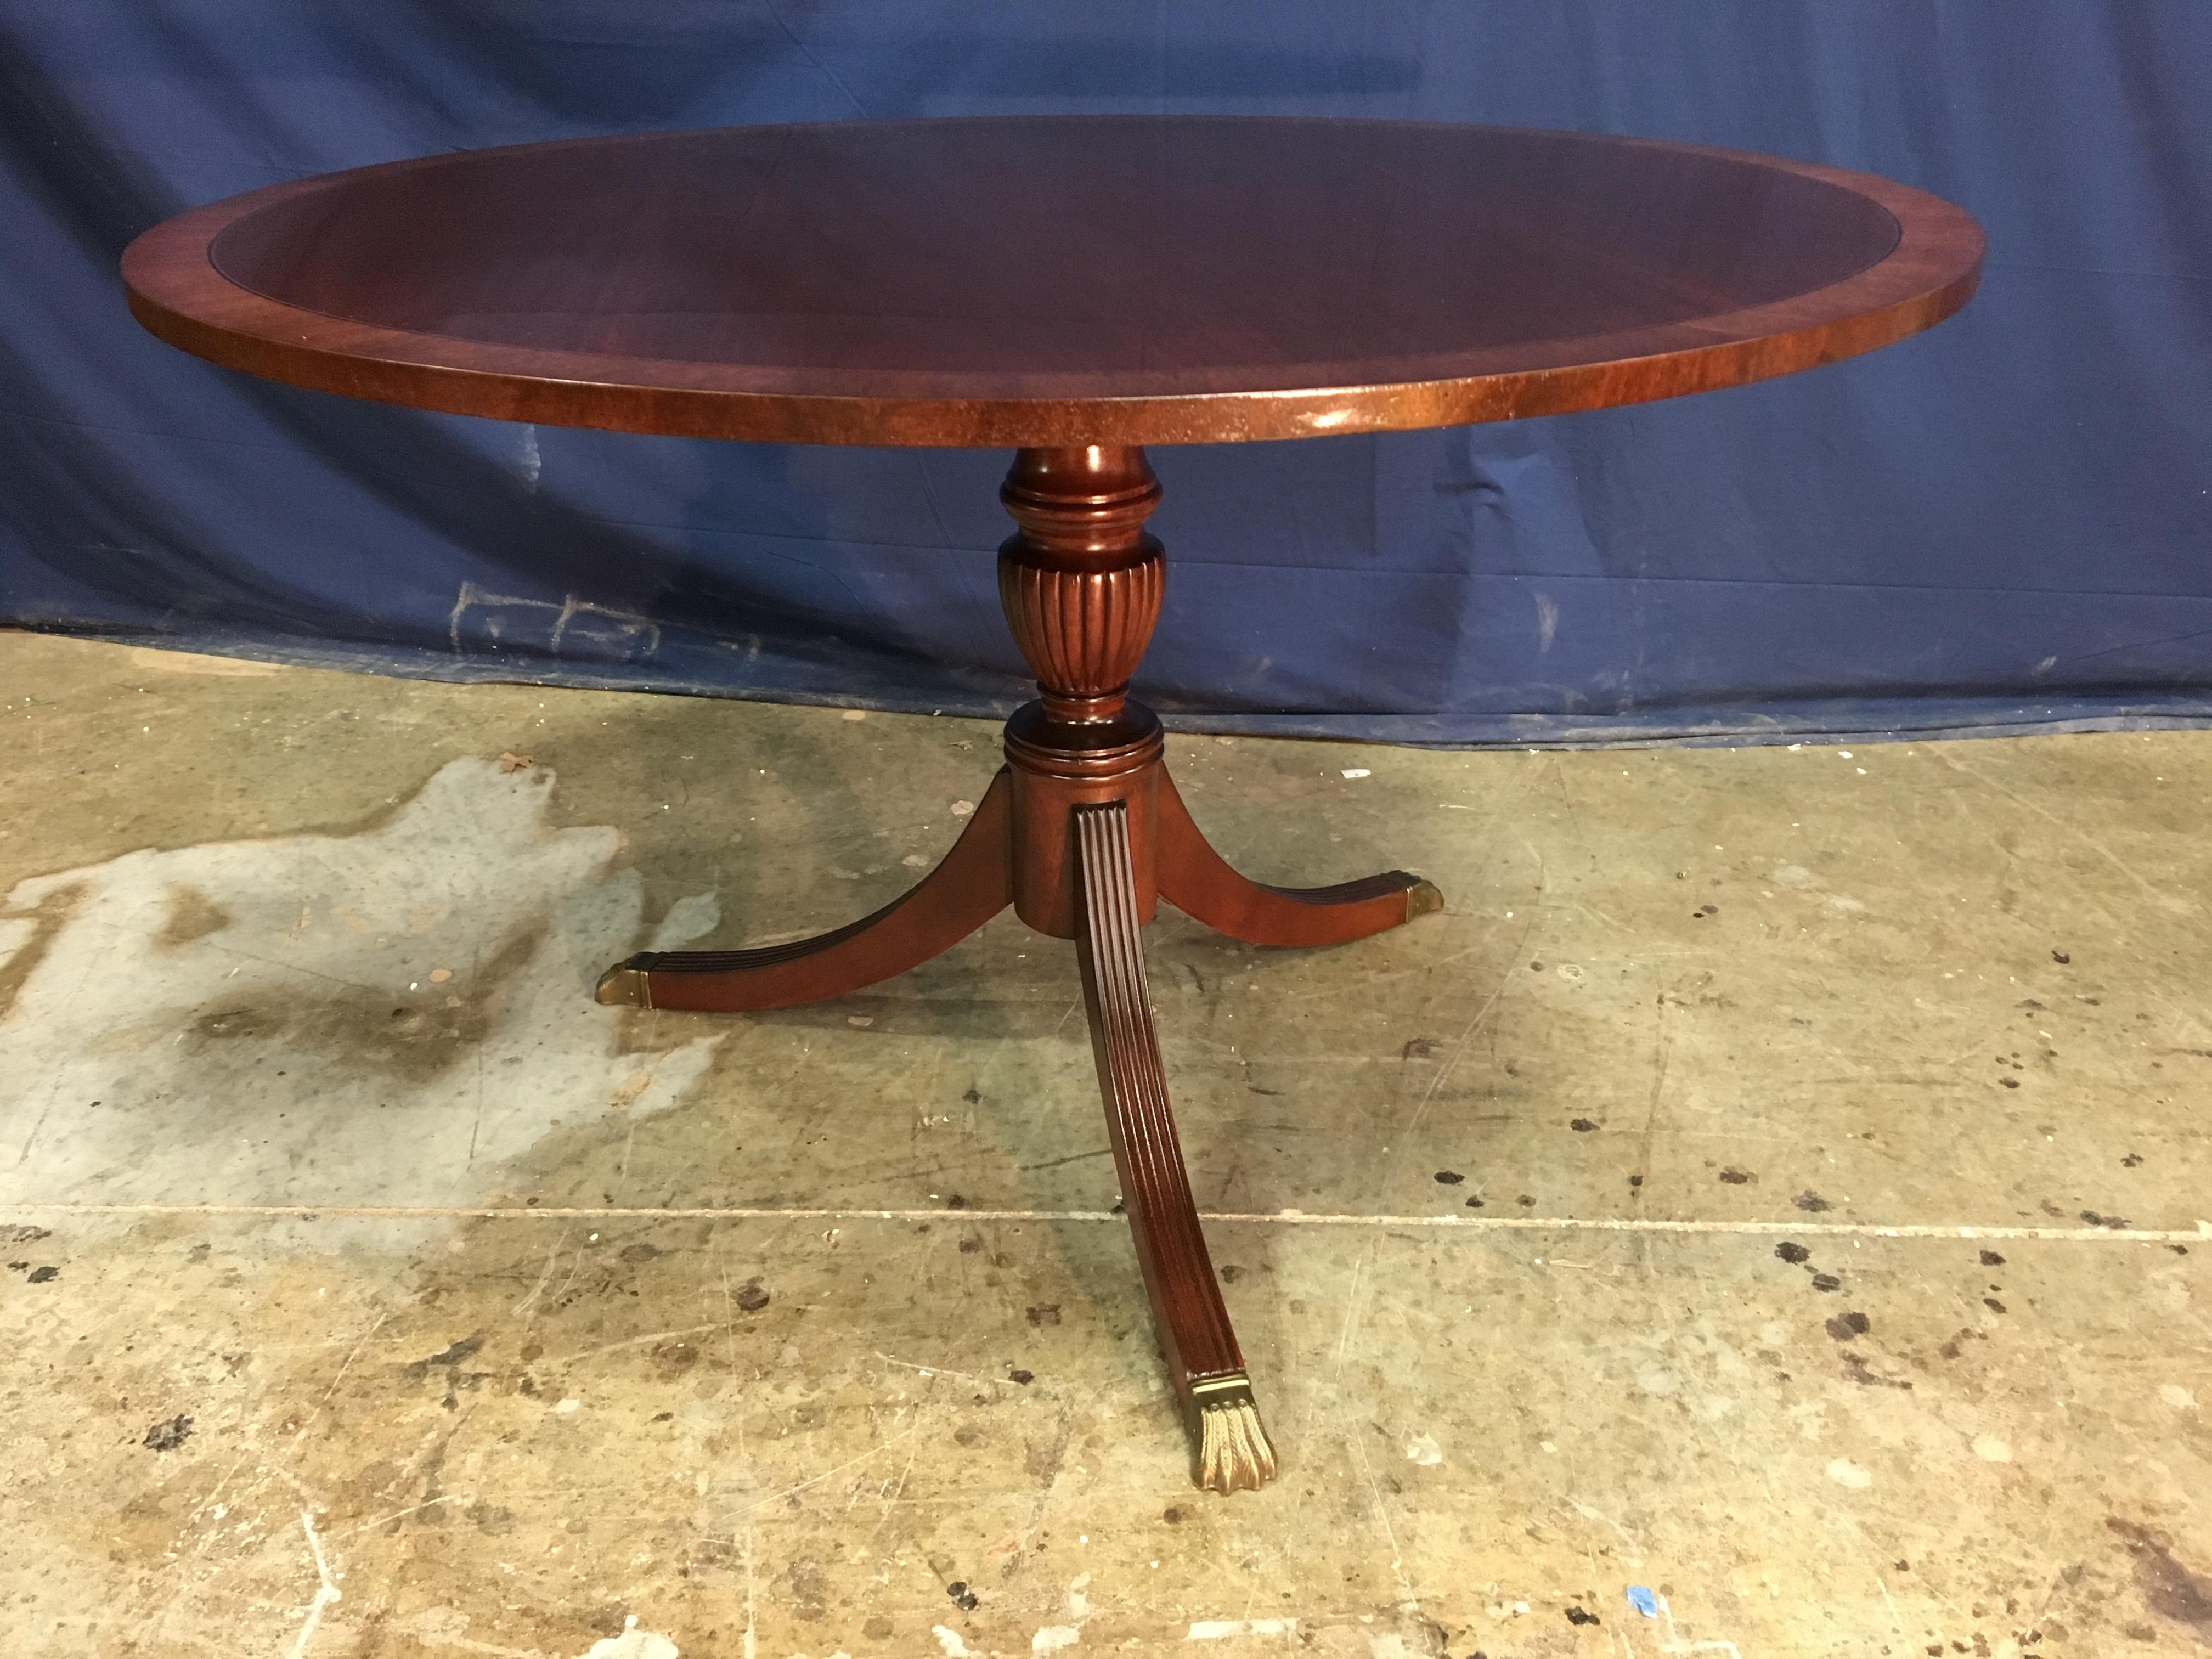 This is made-to-order round traditional mahogany accent/foyer table made in the Leighton Hall shop. It features a field of cathedral mahogany with a contrasting mahogany border. It has a hand rubbed and polished semigloss finish. The pedestal has